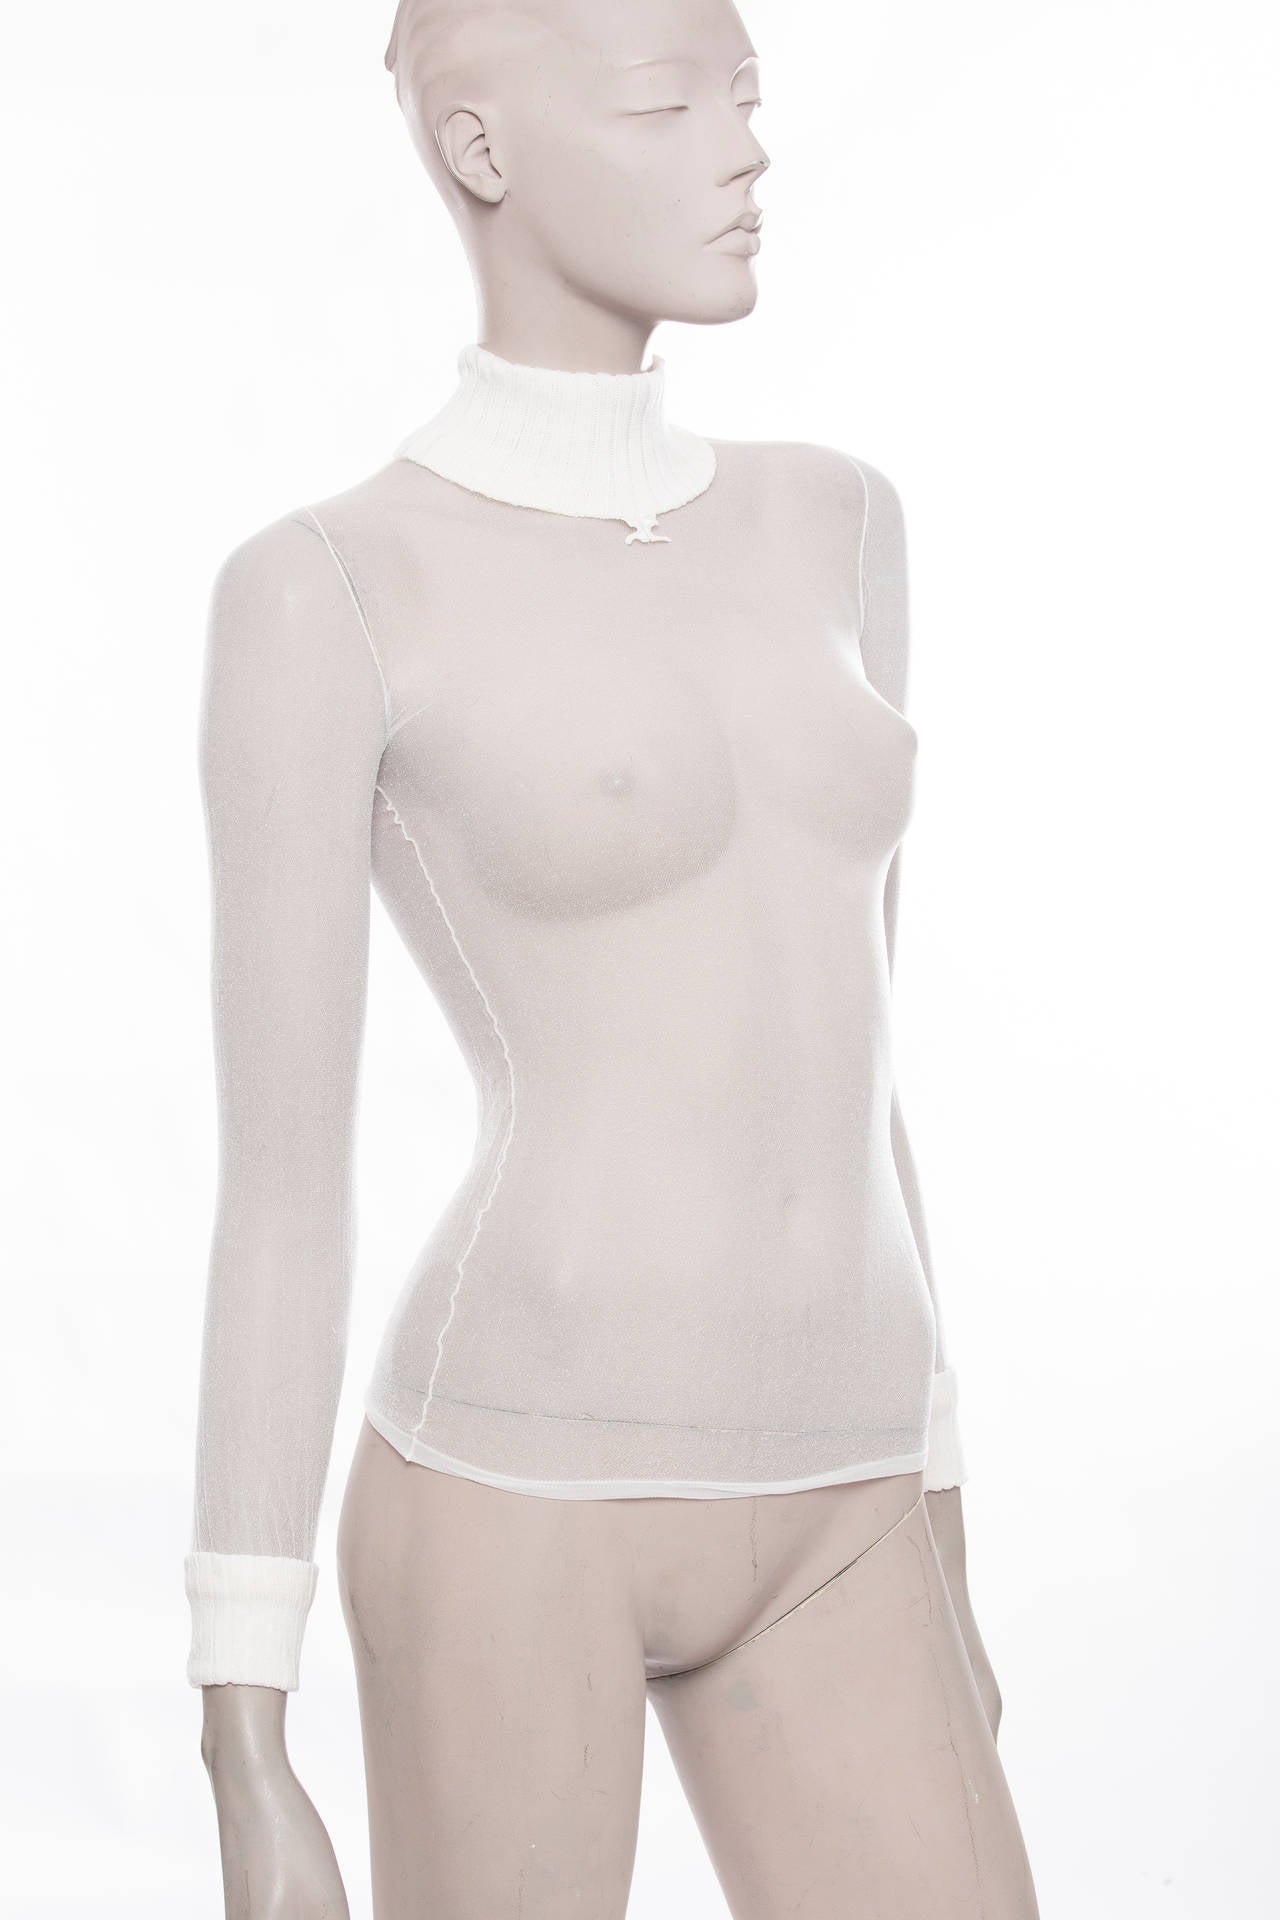 Courreges, circa 1960's stretch nylon, sheer turtleneck with original packaging.